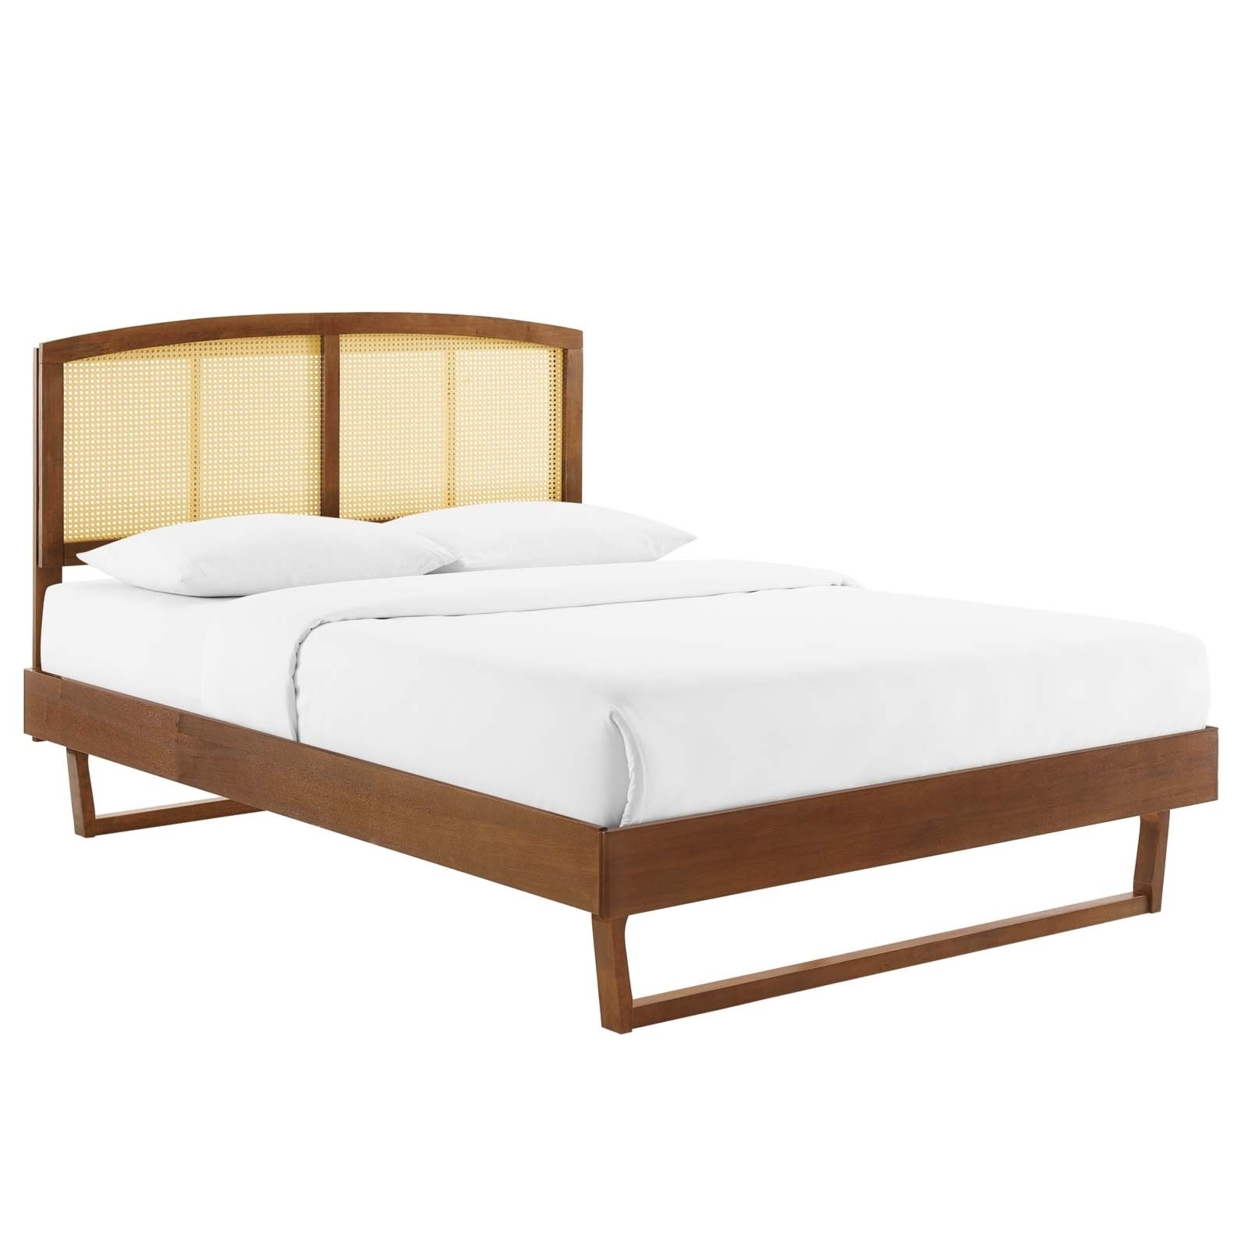 Sierra Cane And Wood Queen Platform Bed With Angular Legs, Walnut